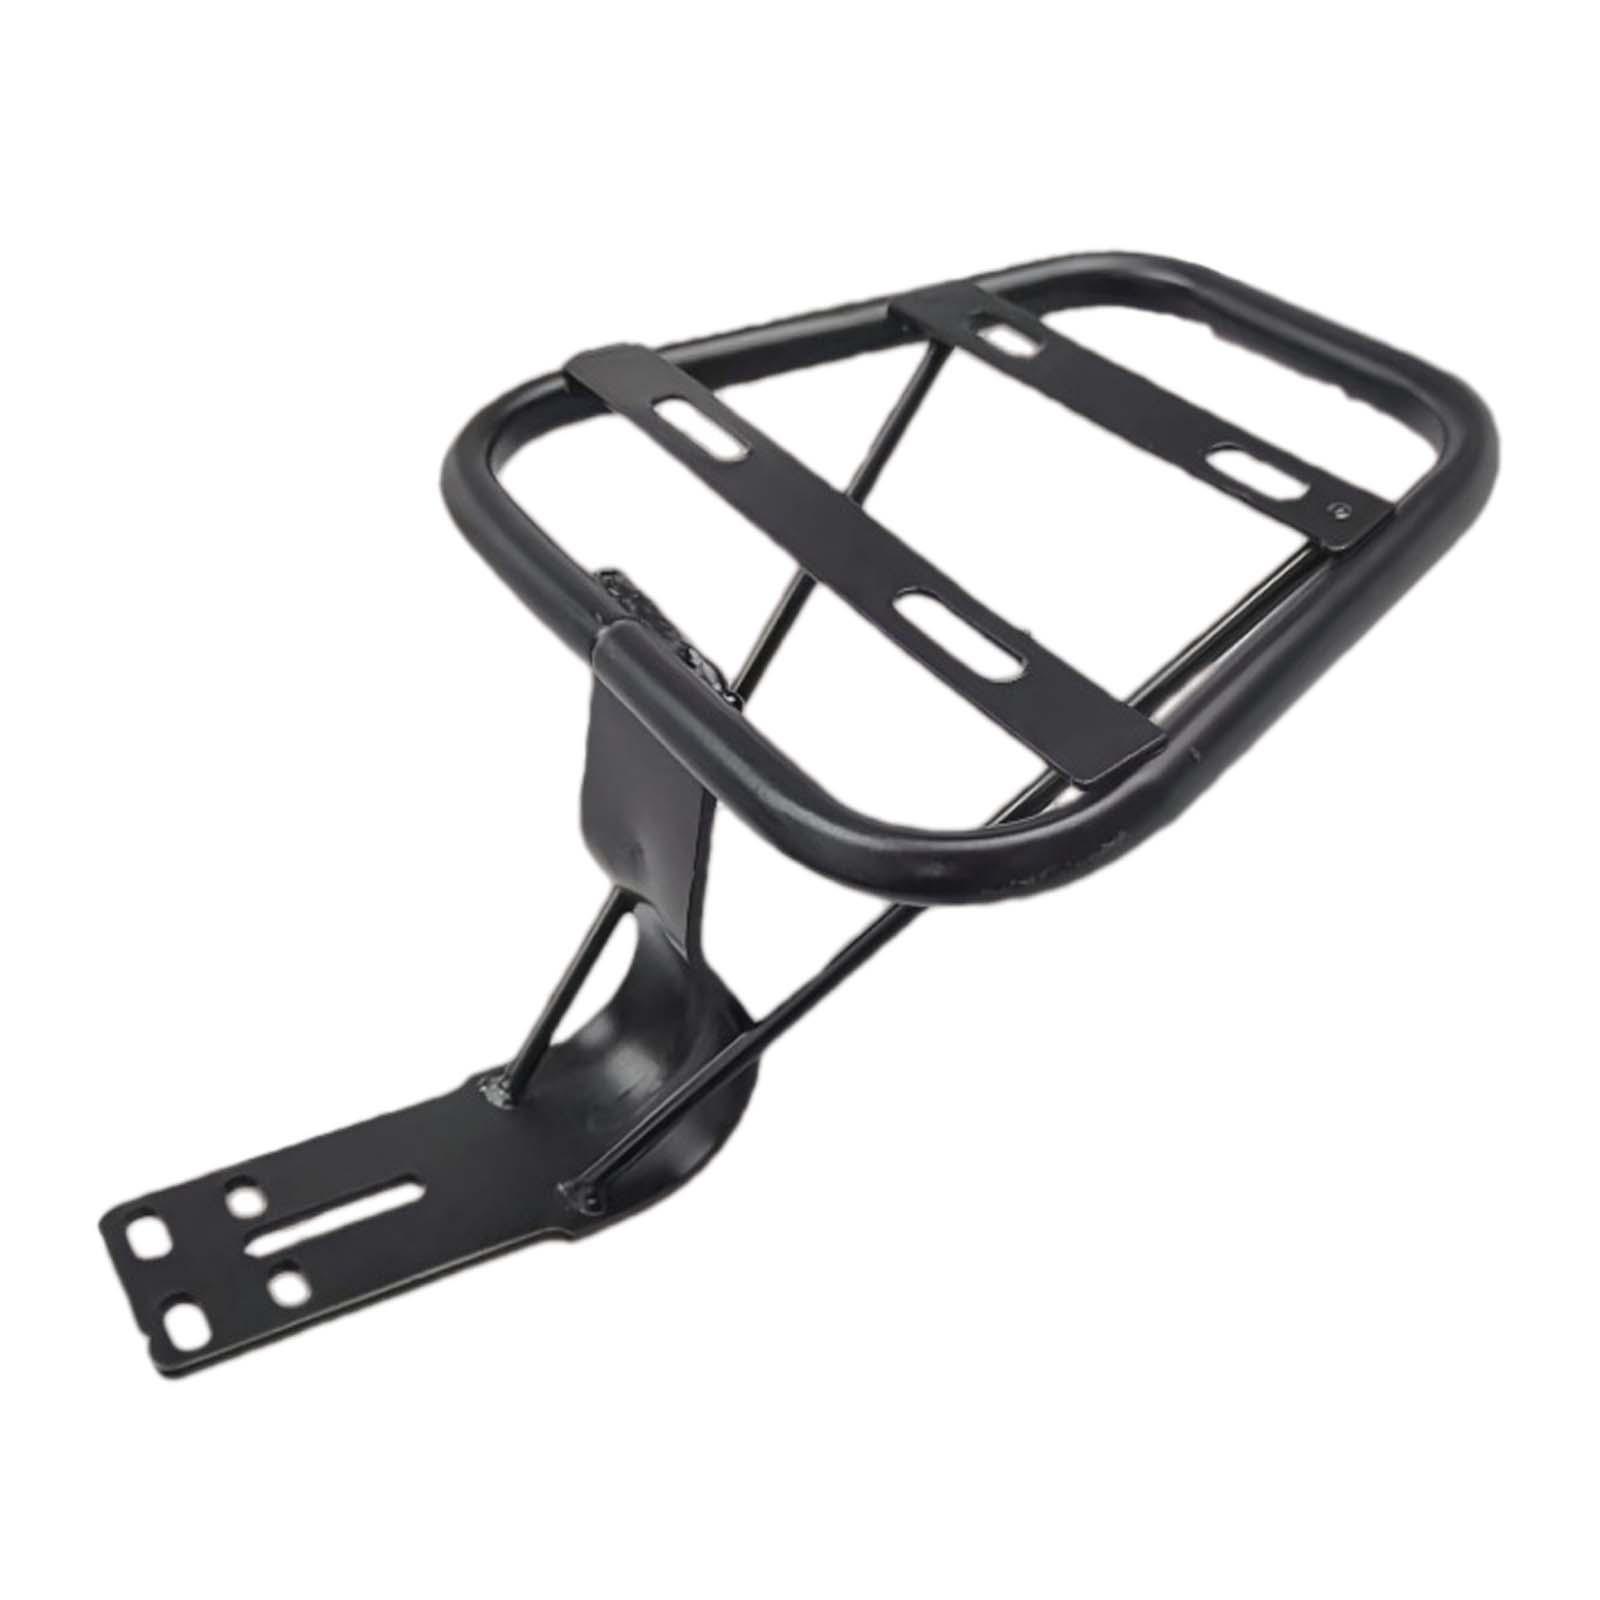 Motorbike Rear Tail Box Carrier Irone Accessories Sturdy Replace Basket Rack